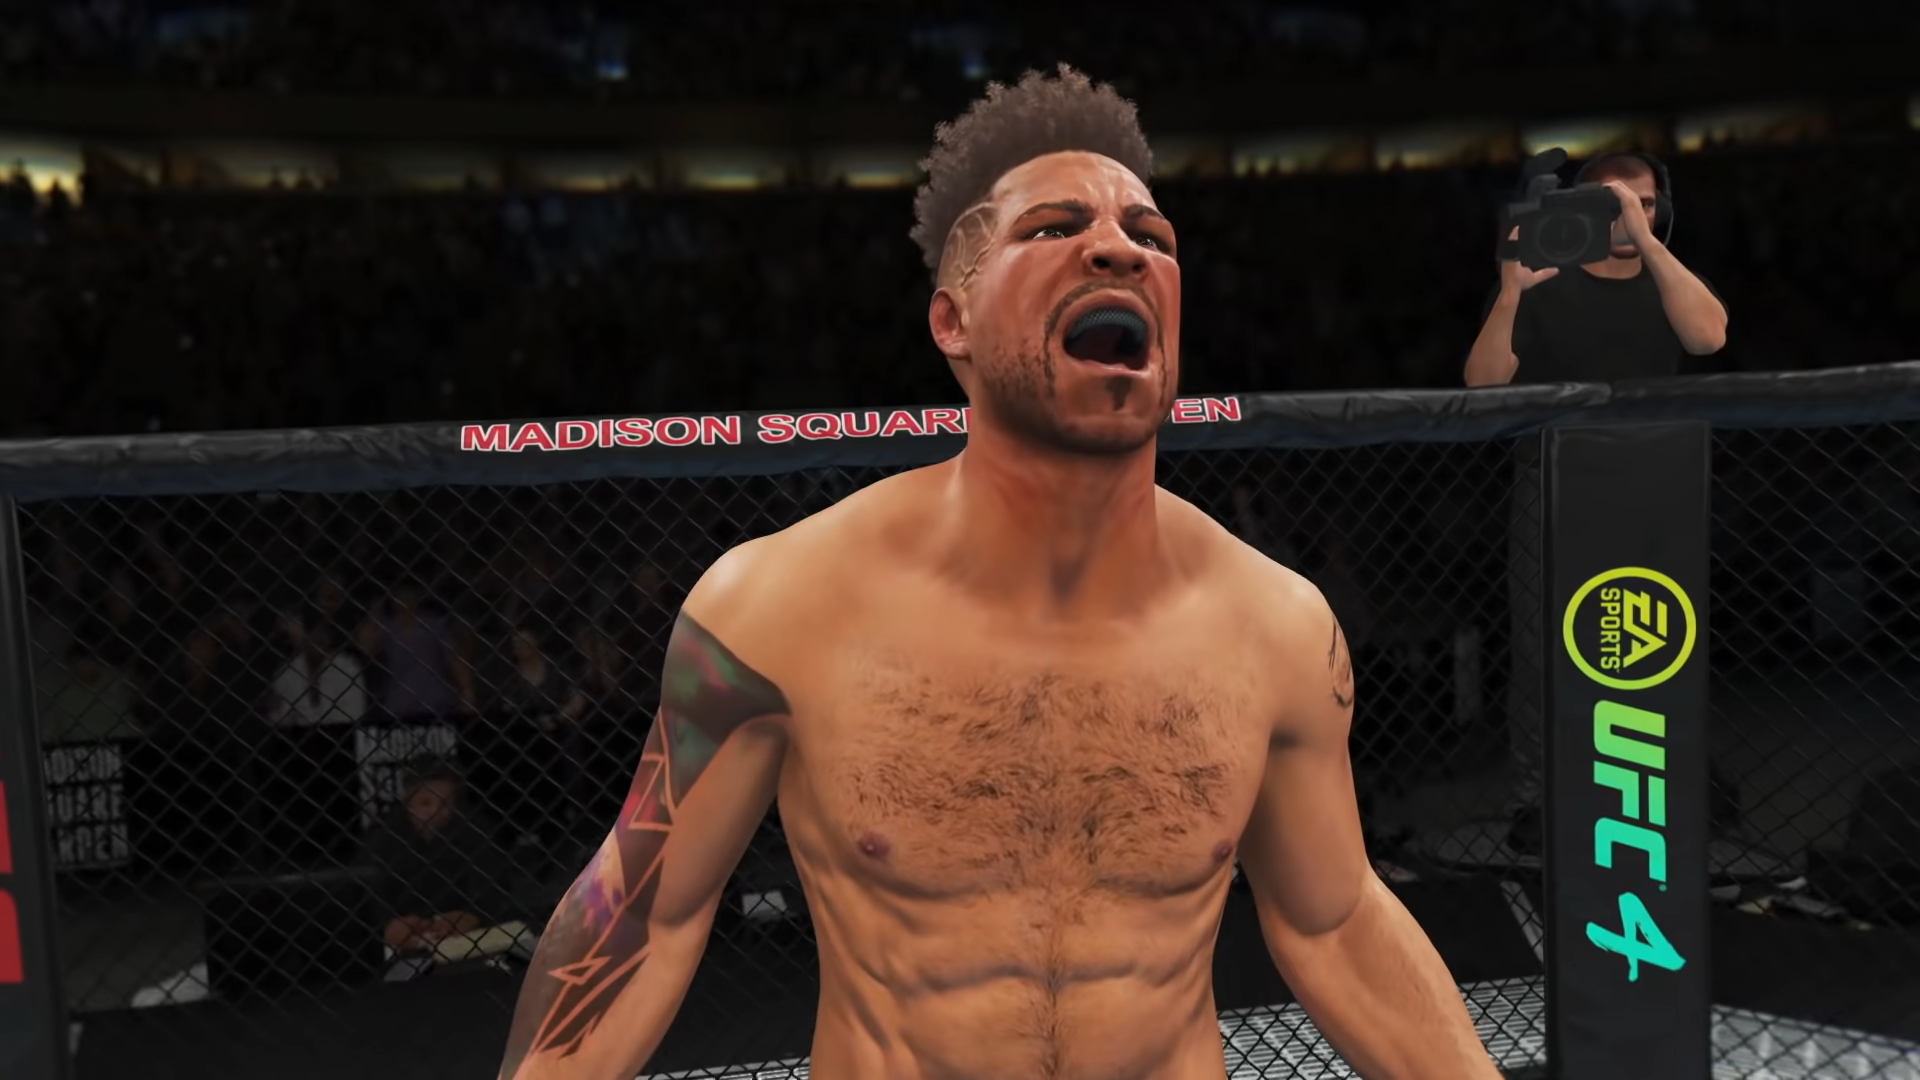  How to equip perks in UFC 4 career mode 